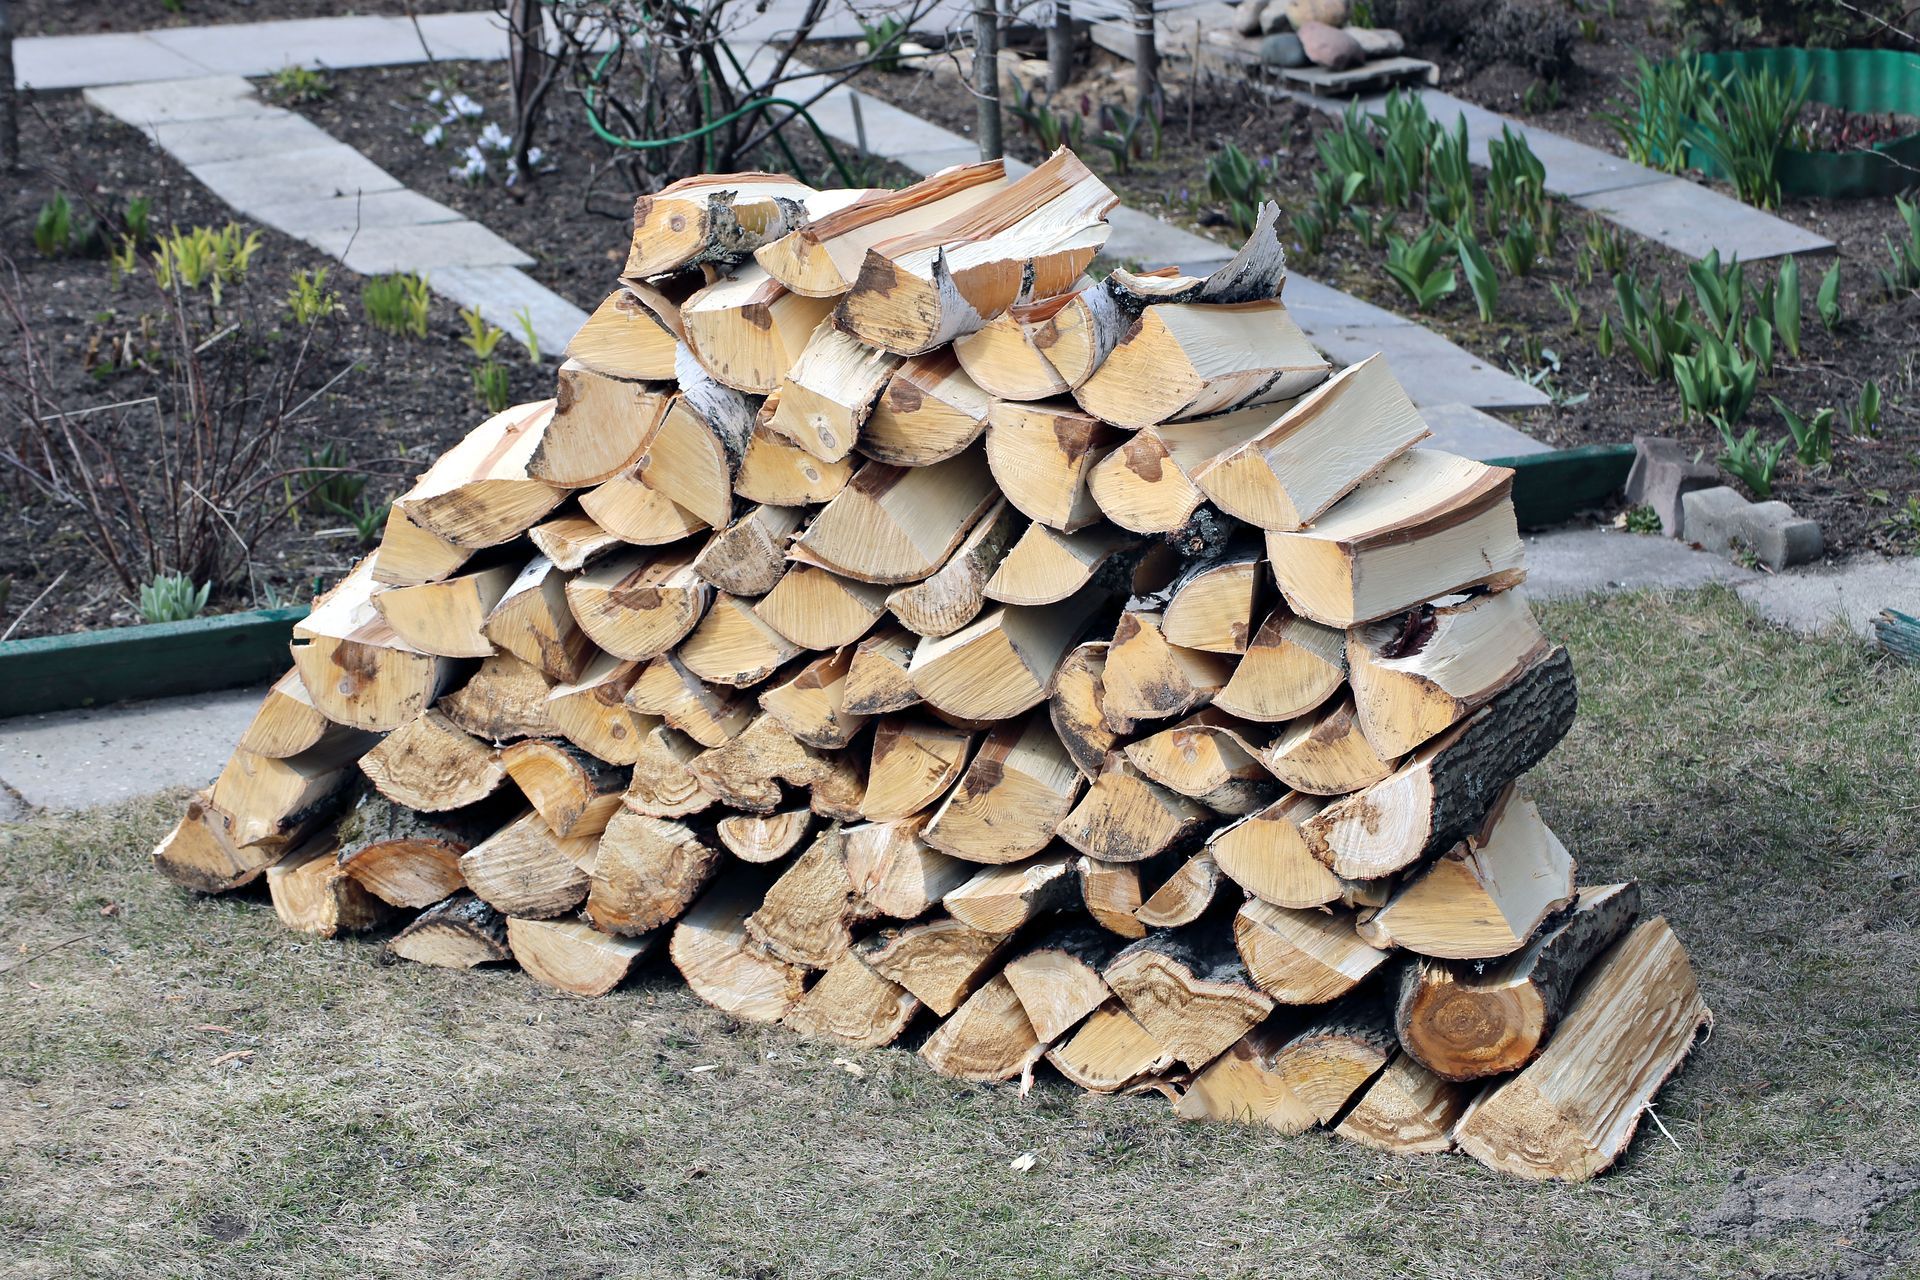 Firewood suppliers